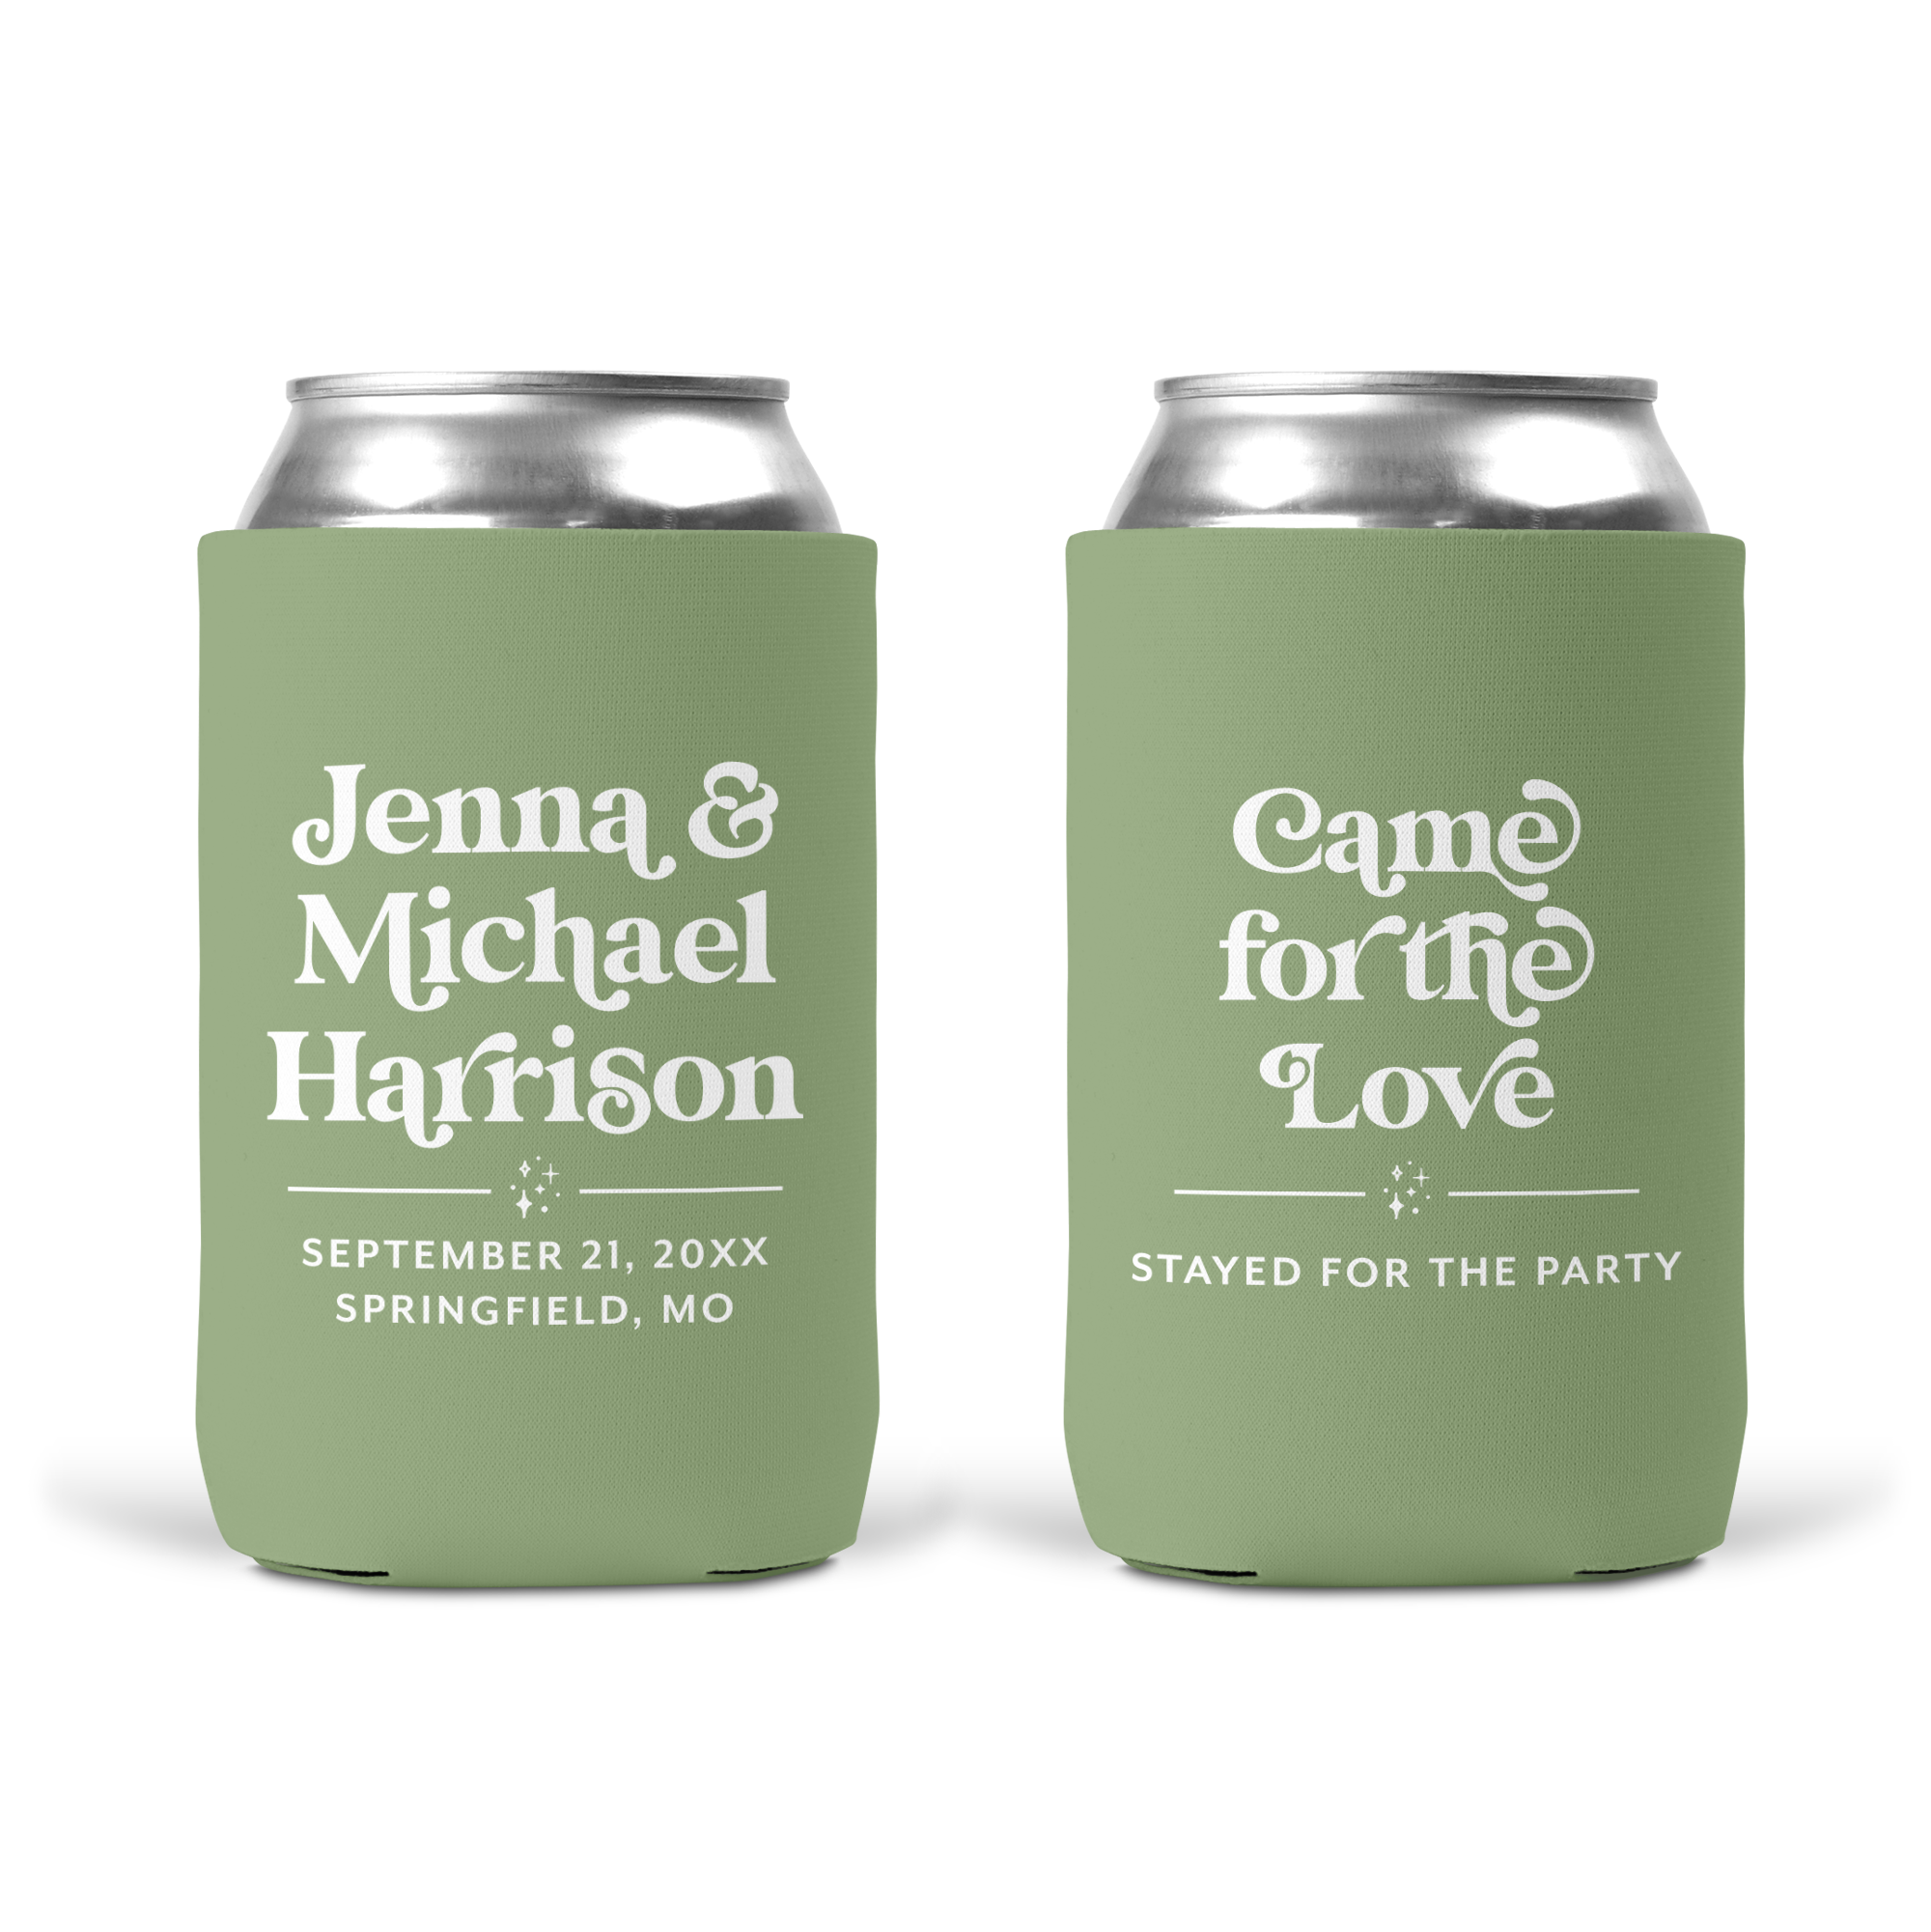 Stayed for the Love, Came for the Party Personalized Wedding Favor Wedding Can Koozie, Coolie, Coosie - Style T252